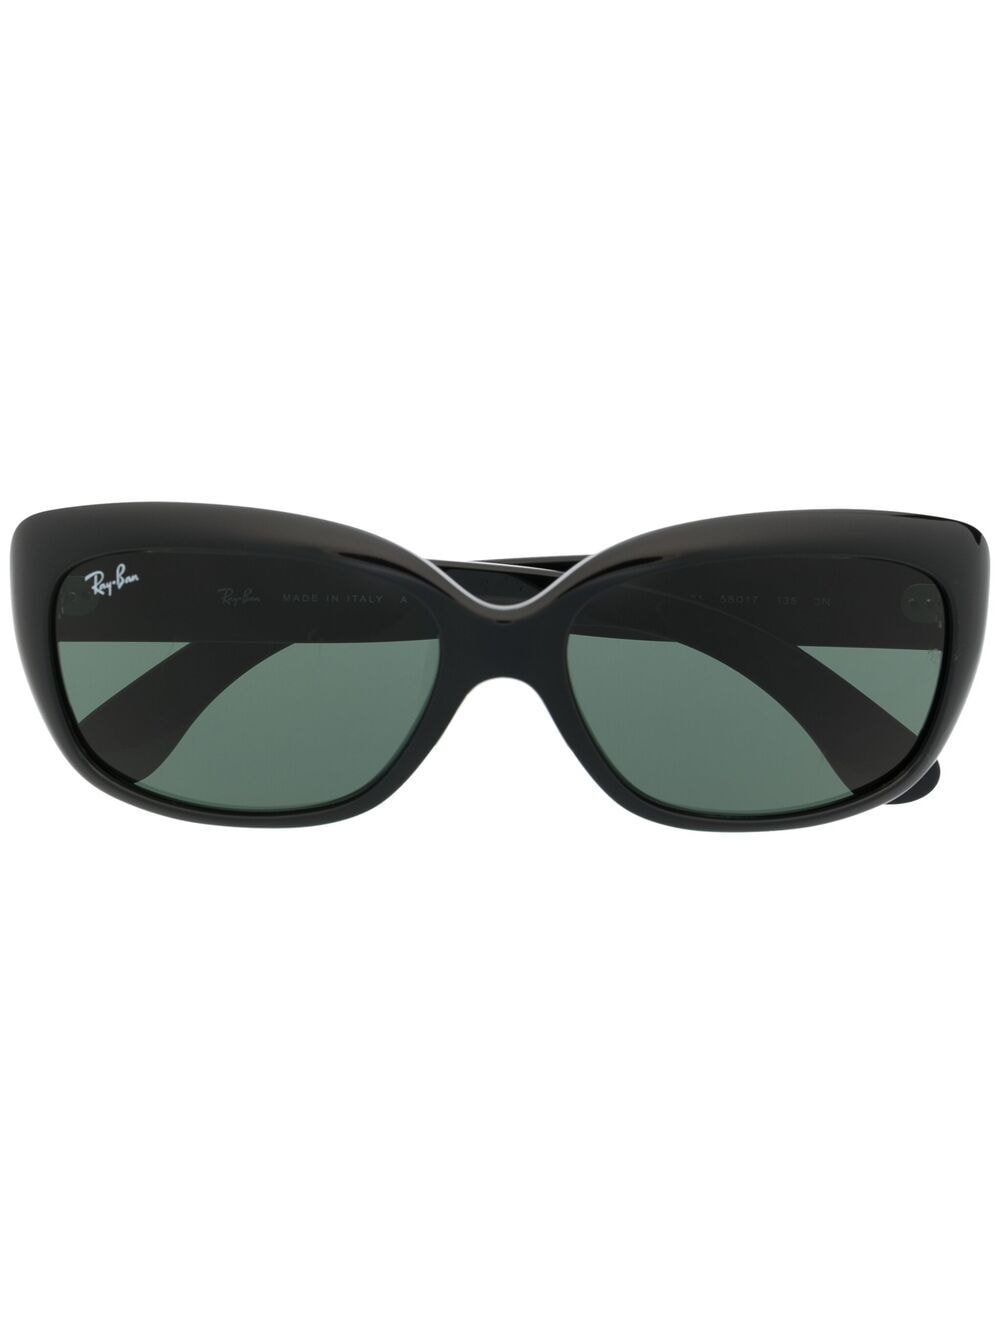 Ray-Ban Jackie Ohh rectangle-frame sunglasses - Blue von Ray-Ban